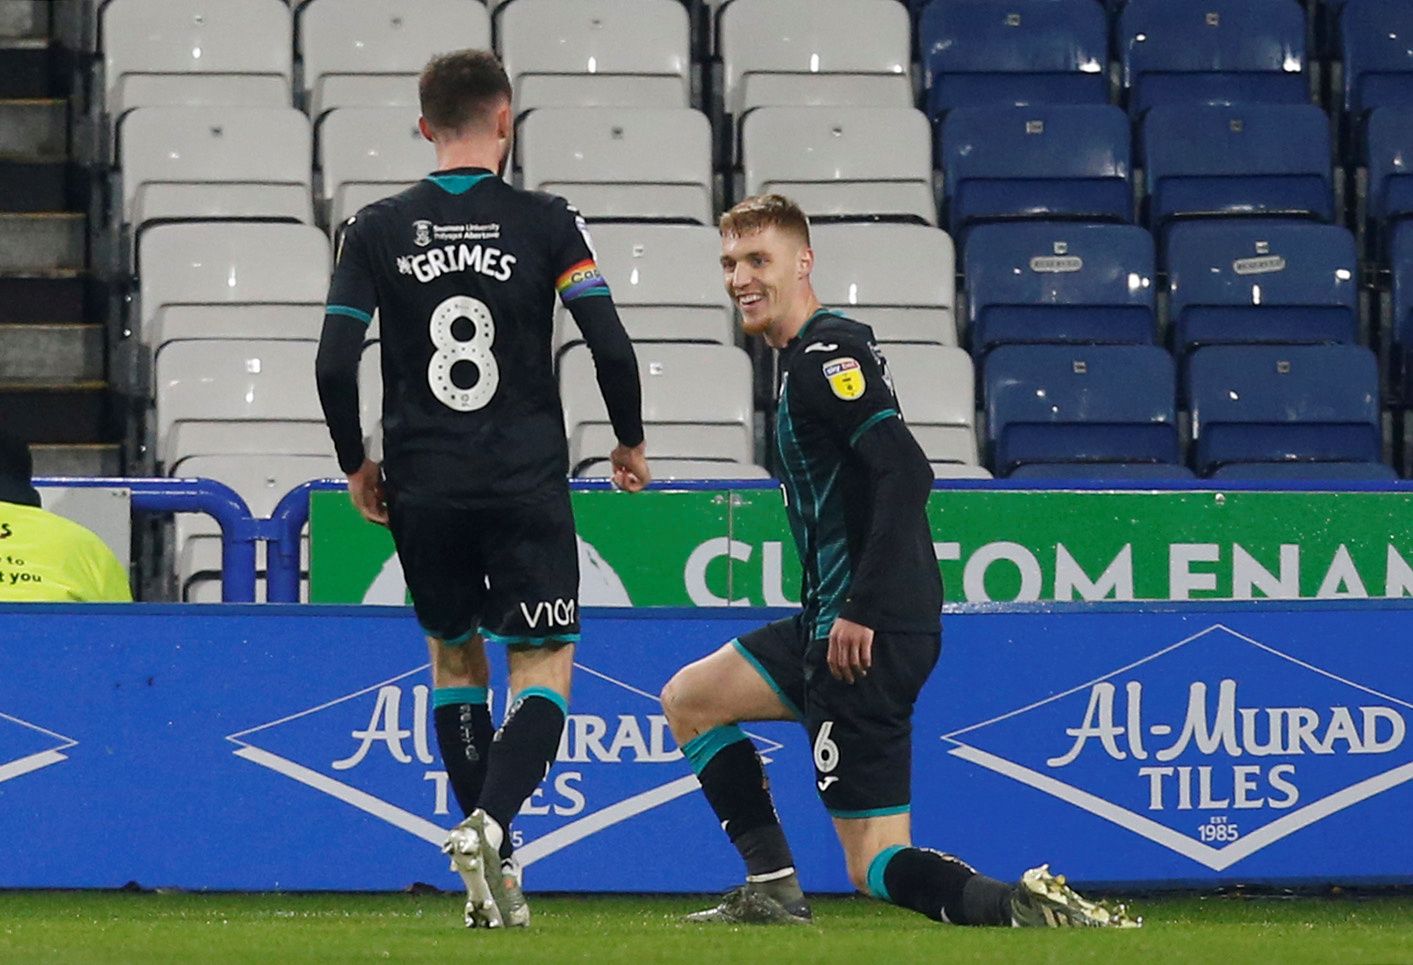 Soccer Football - Championship - Huddersfield Town v Swansea City - John Smith's Stadium, Huddersfield, Britain - November 26, 2019  Swansea City's Jay Fulton celebrates scoring their first goal   Action Images/Ed Sykes  EDITORIAL USE ONLY. No use with unauthorized audio, video, data, fixture lists, club/league logos or 